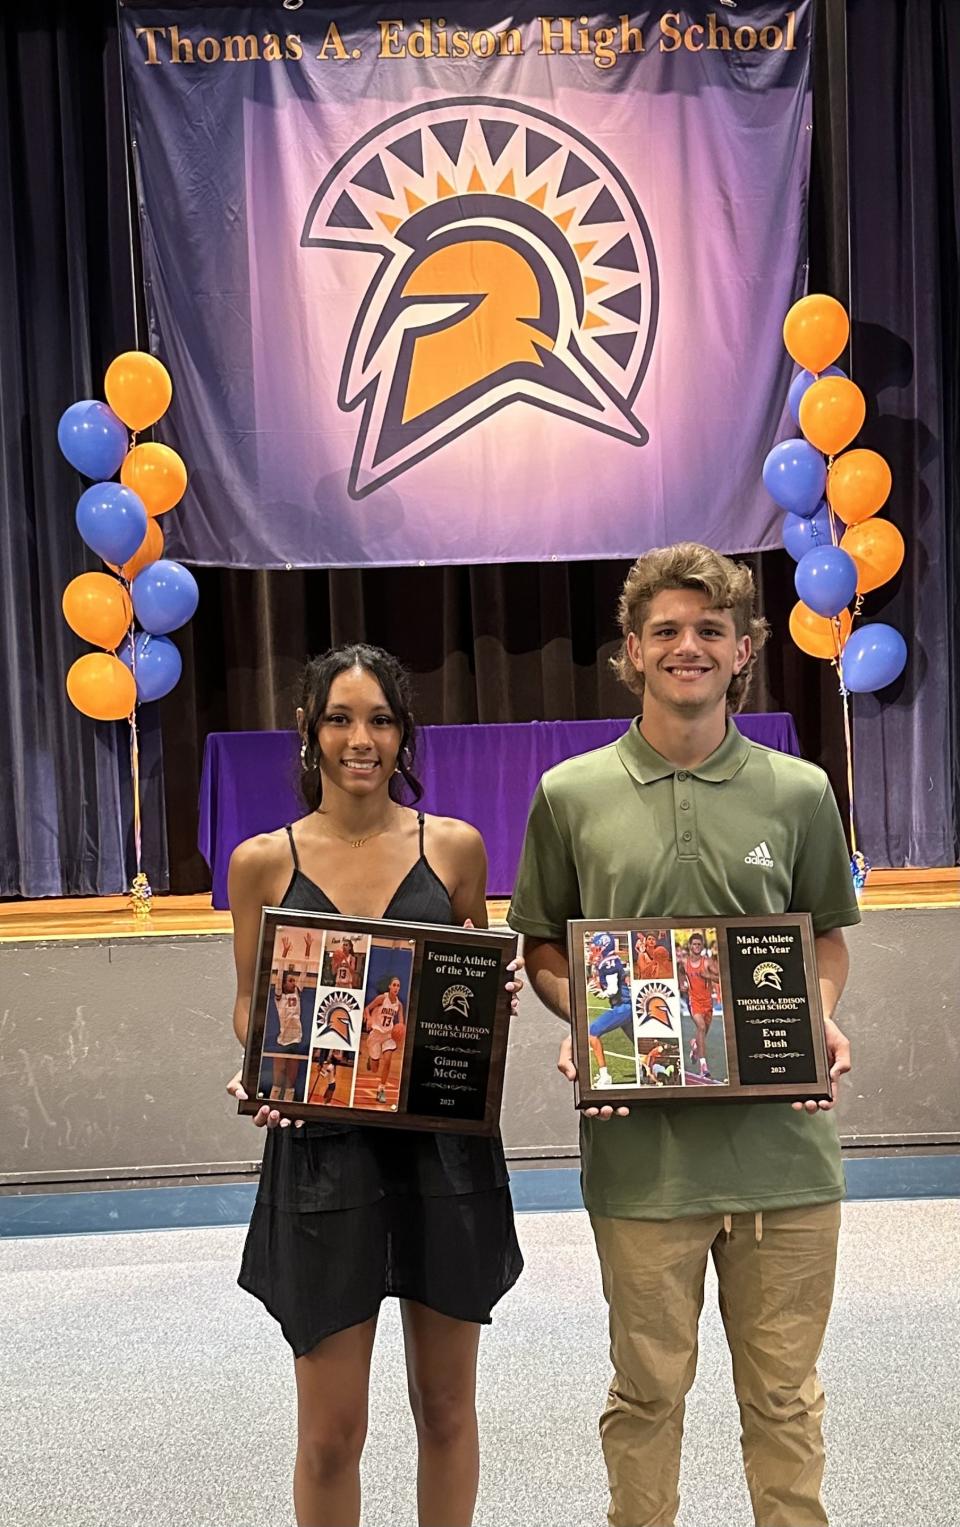 Thomas A. Edison's Gianna McGee and Evan Bush were honored as the school's Athletes of the Year during the 2022-23 awards ceremony June 12, 2023.